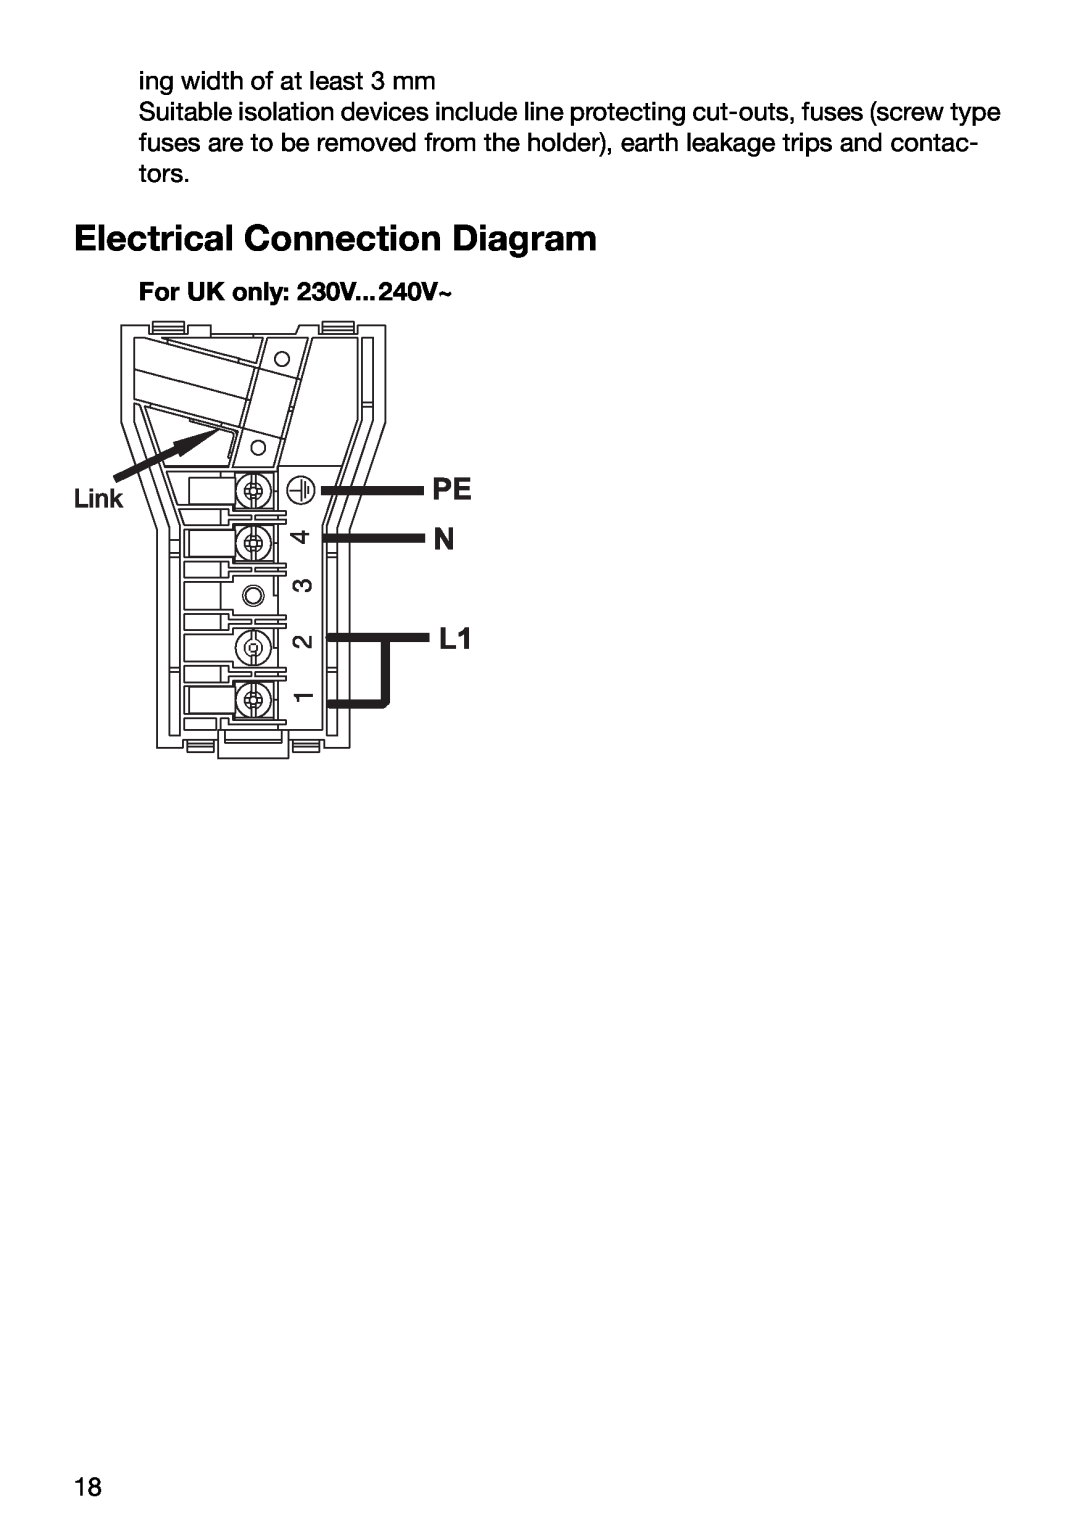 Electrolux TBC 651 X installation instructions Electrical Connection Diagram, For UK only 230V...240V~ 